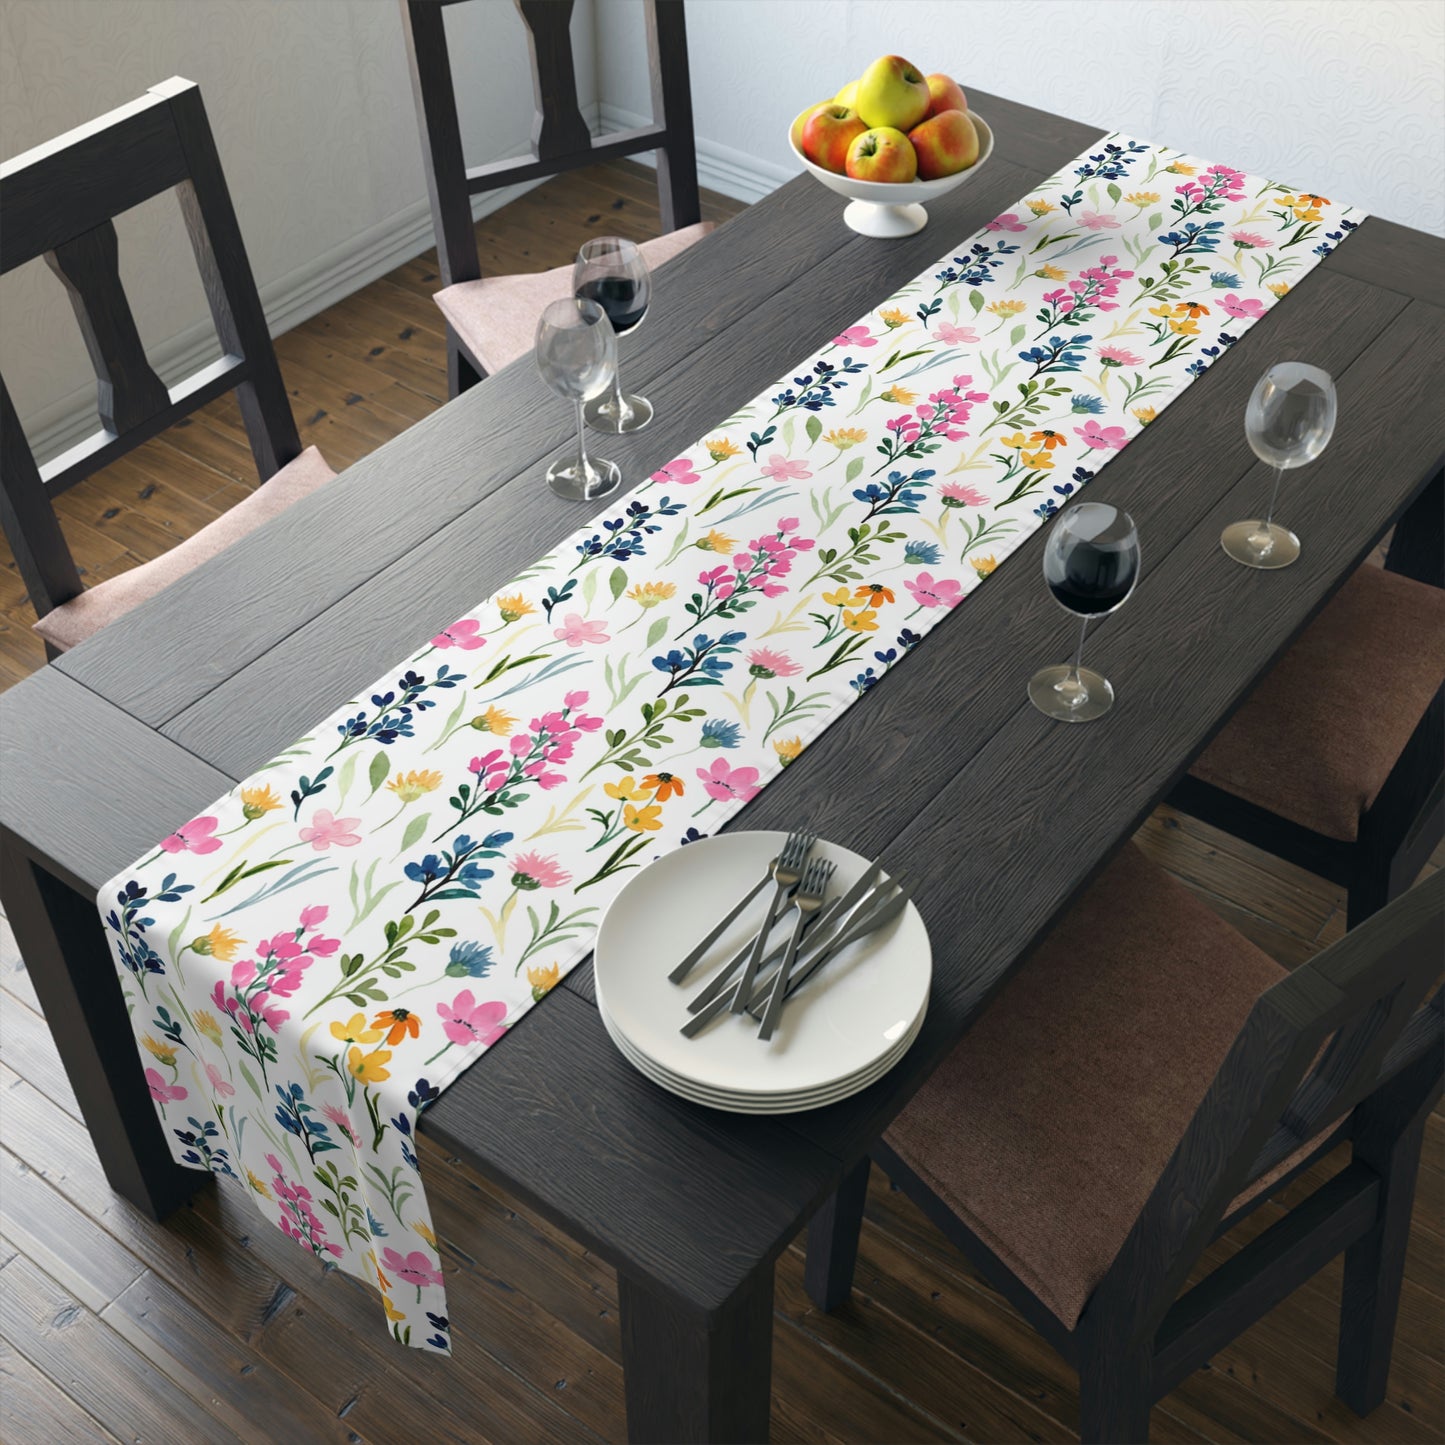 Wild Flowers Table Runner, Floral Vintage Home Decor Decoration Theme Tablecoth Cotton Dining Linen Starcove Fashion